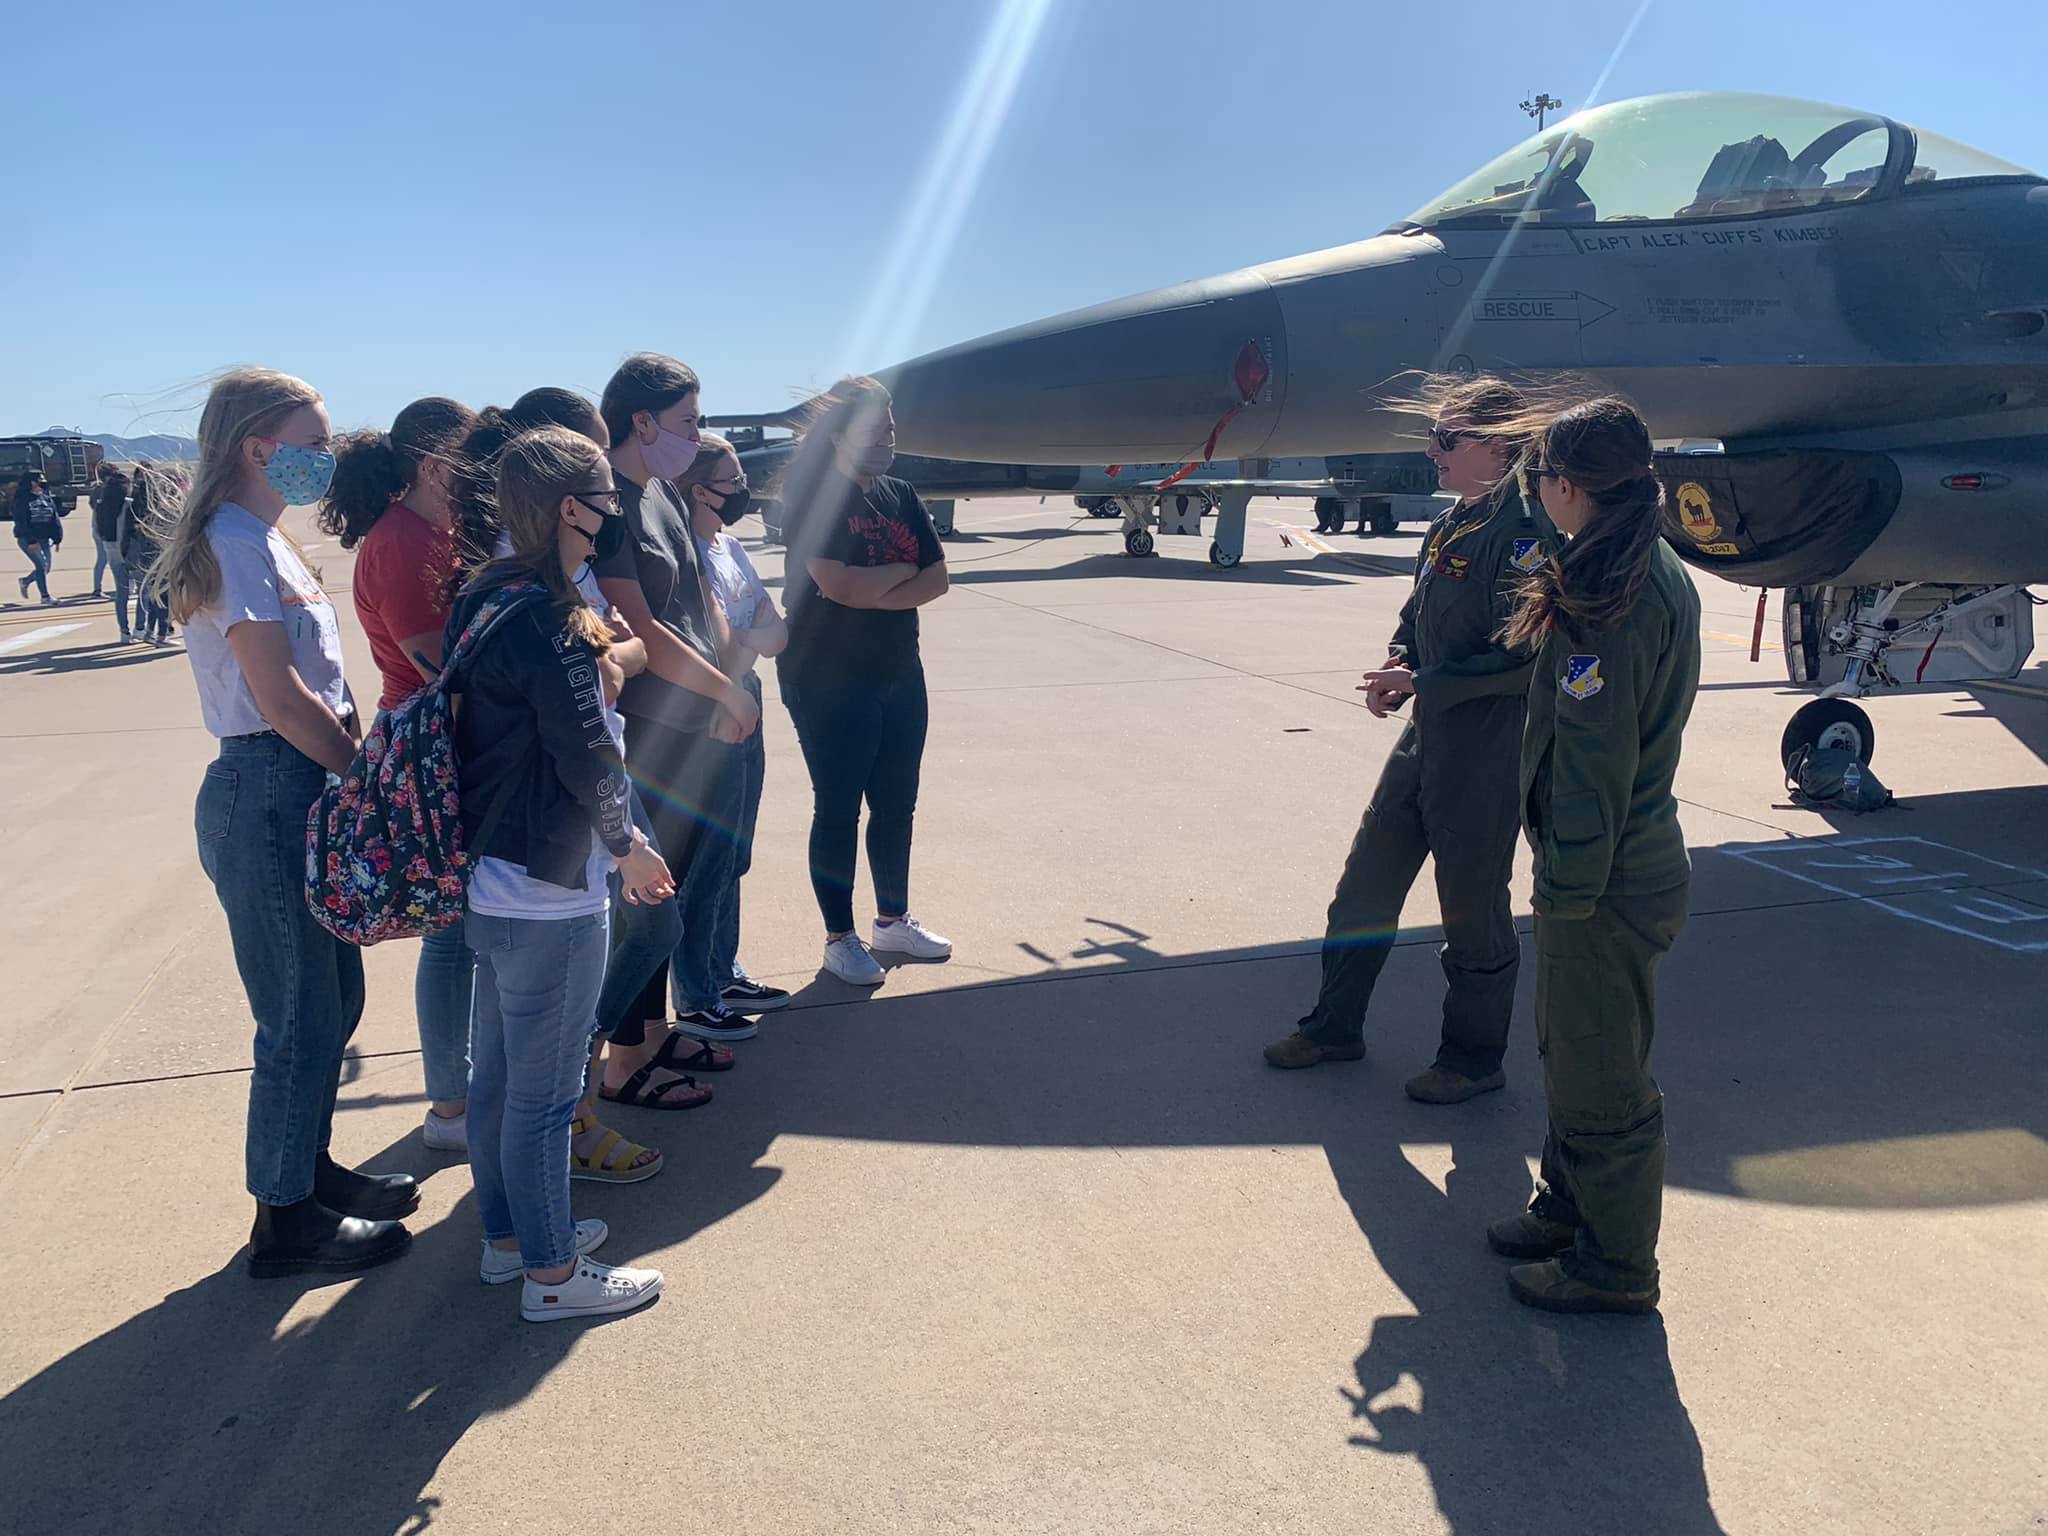 STEM girls club tours Air Force Base with female officer